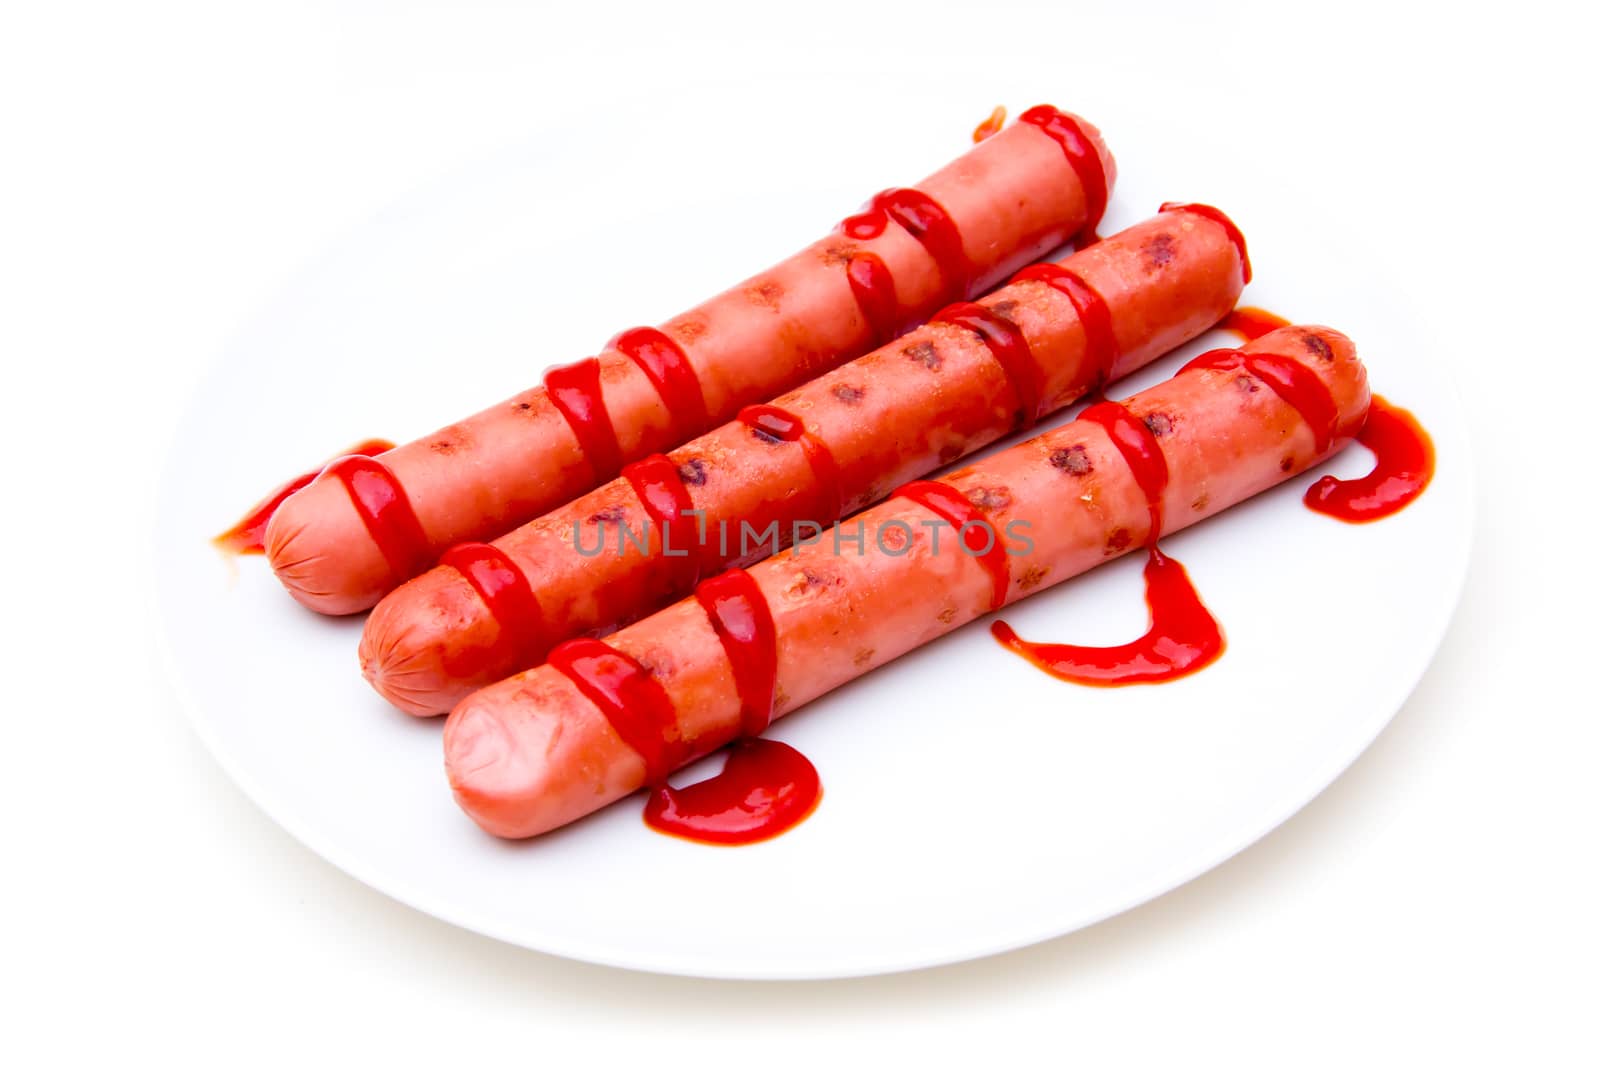 Sausages with Tomato Sauce by spafra